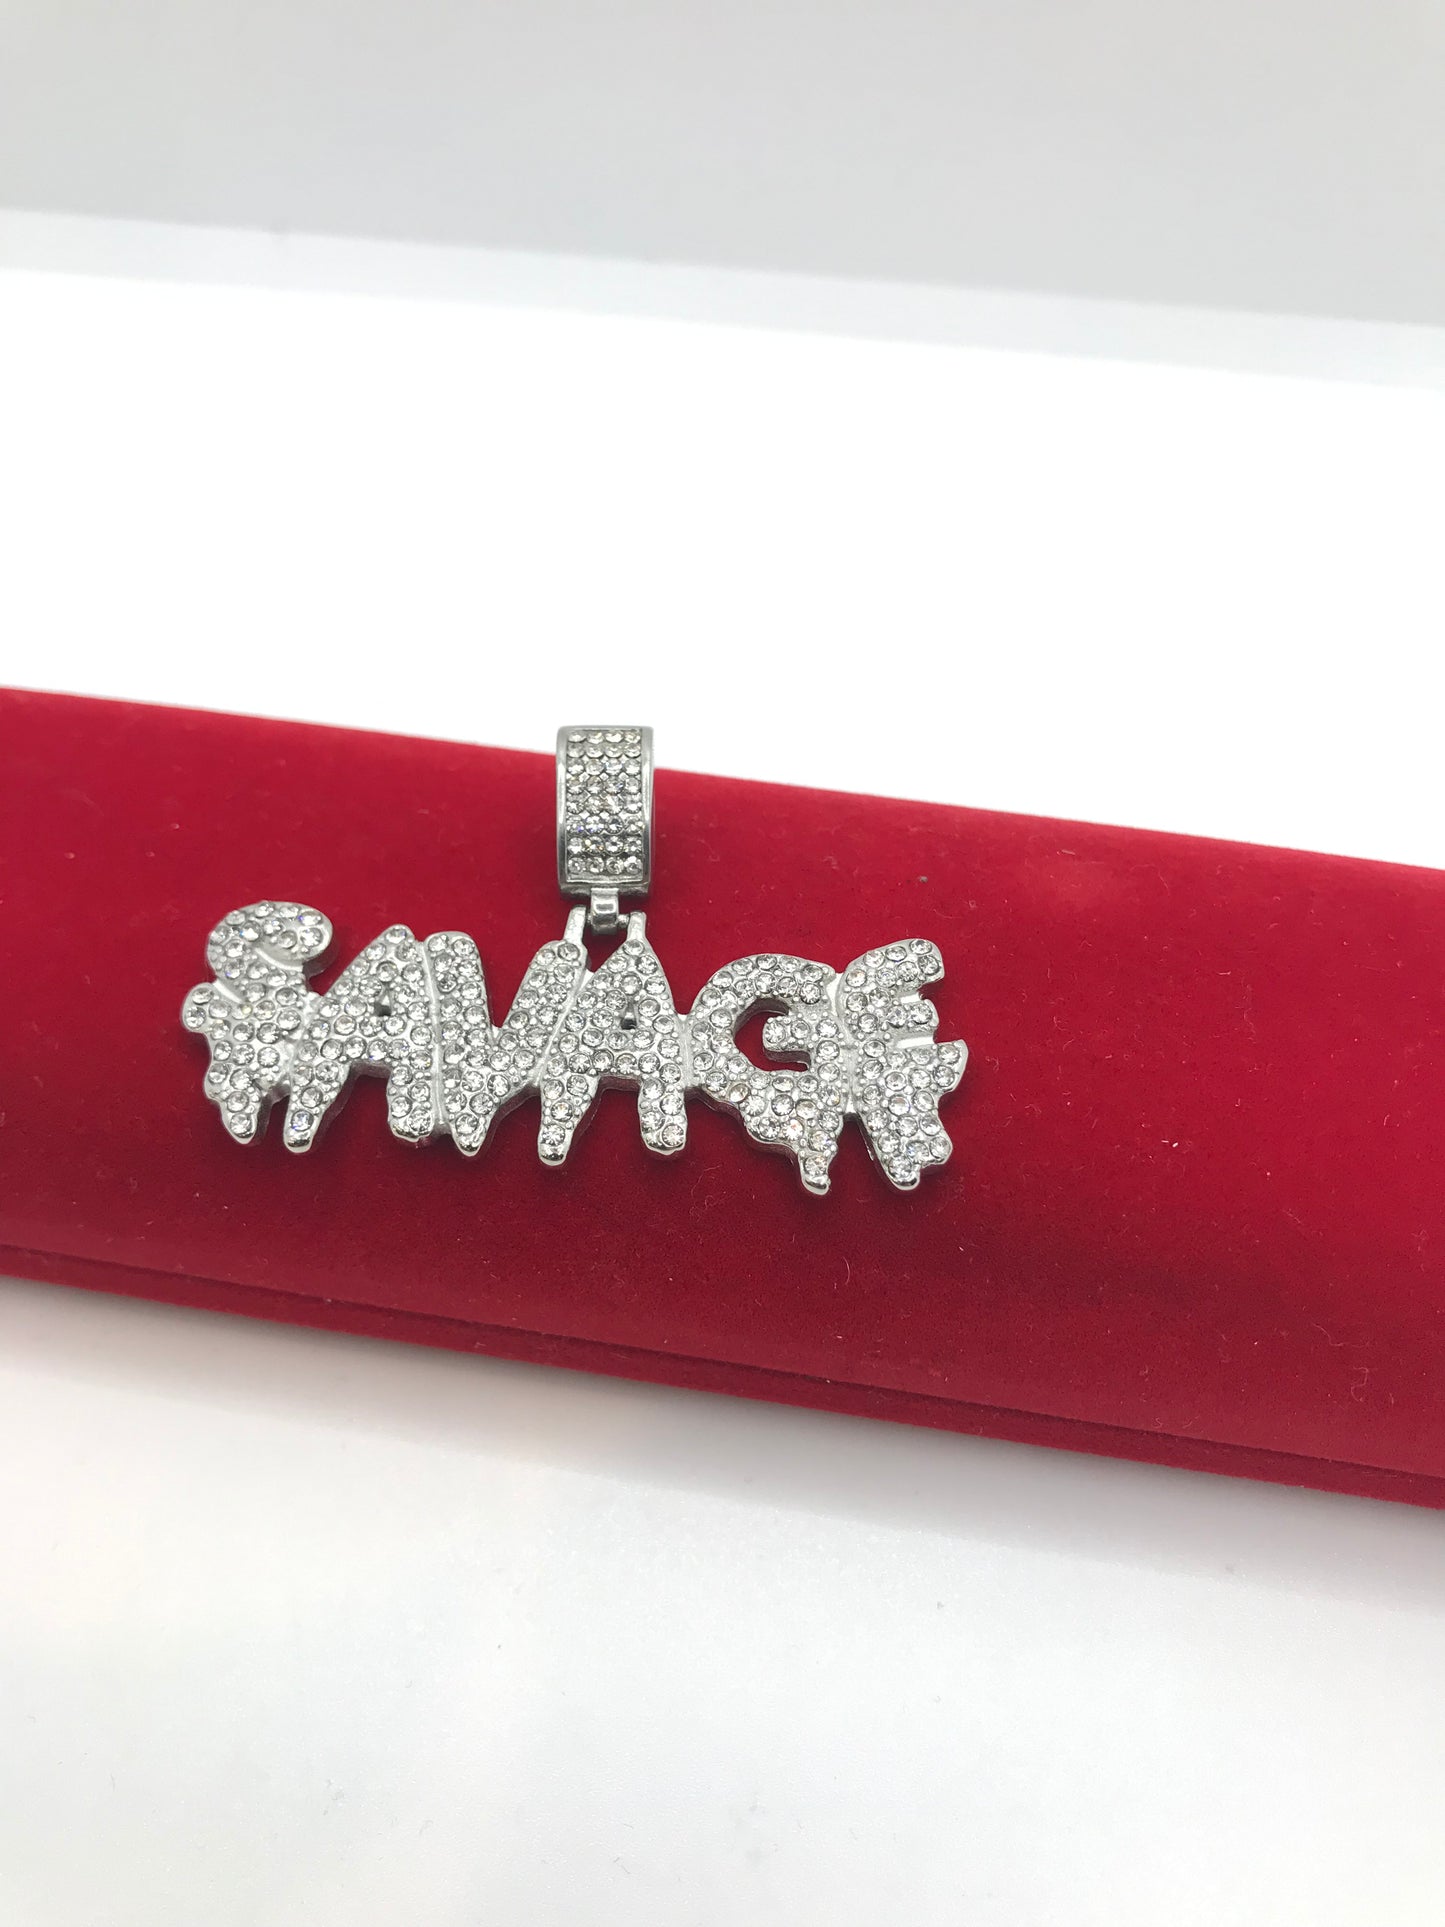 Hip hop iced out savage pendant